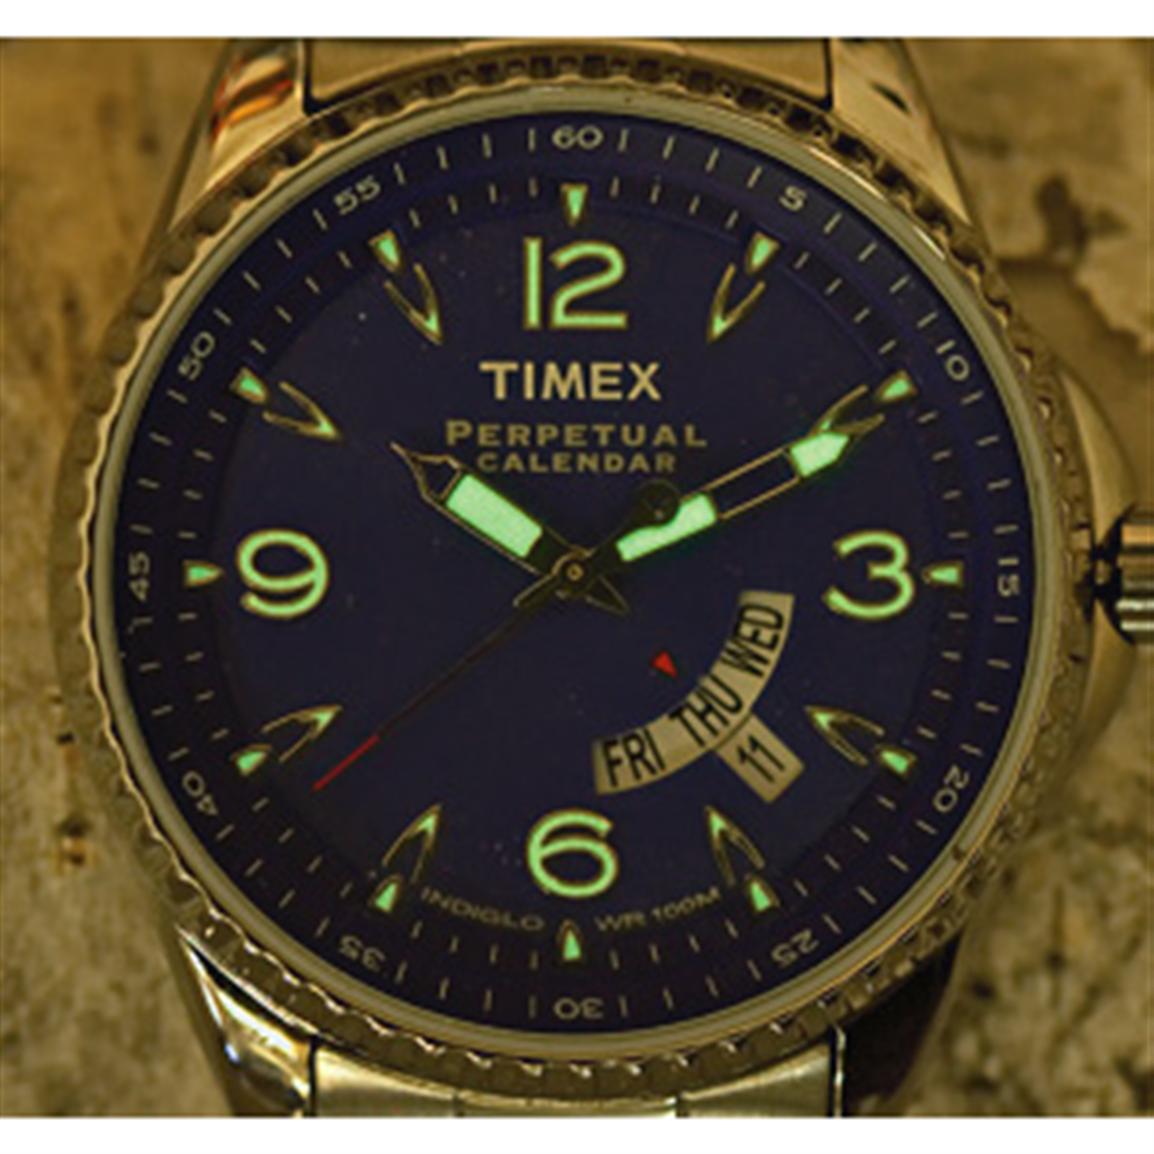 Timex® Perpetual Calendar Watch 155330, Watches at Sportsman's Guide